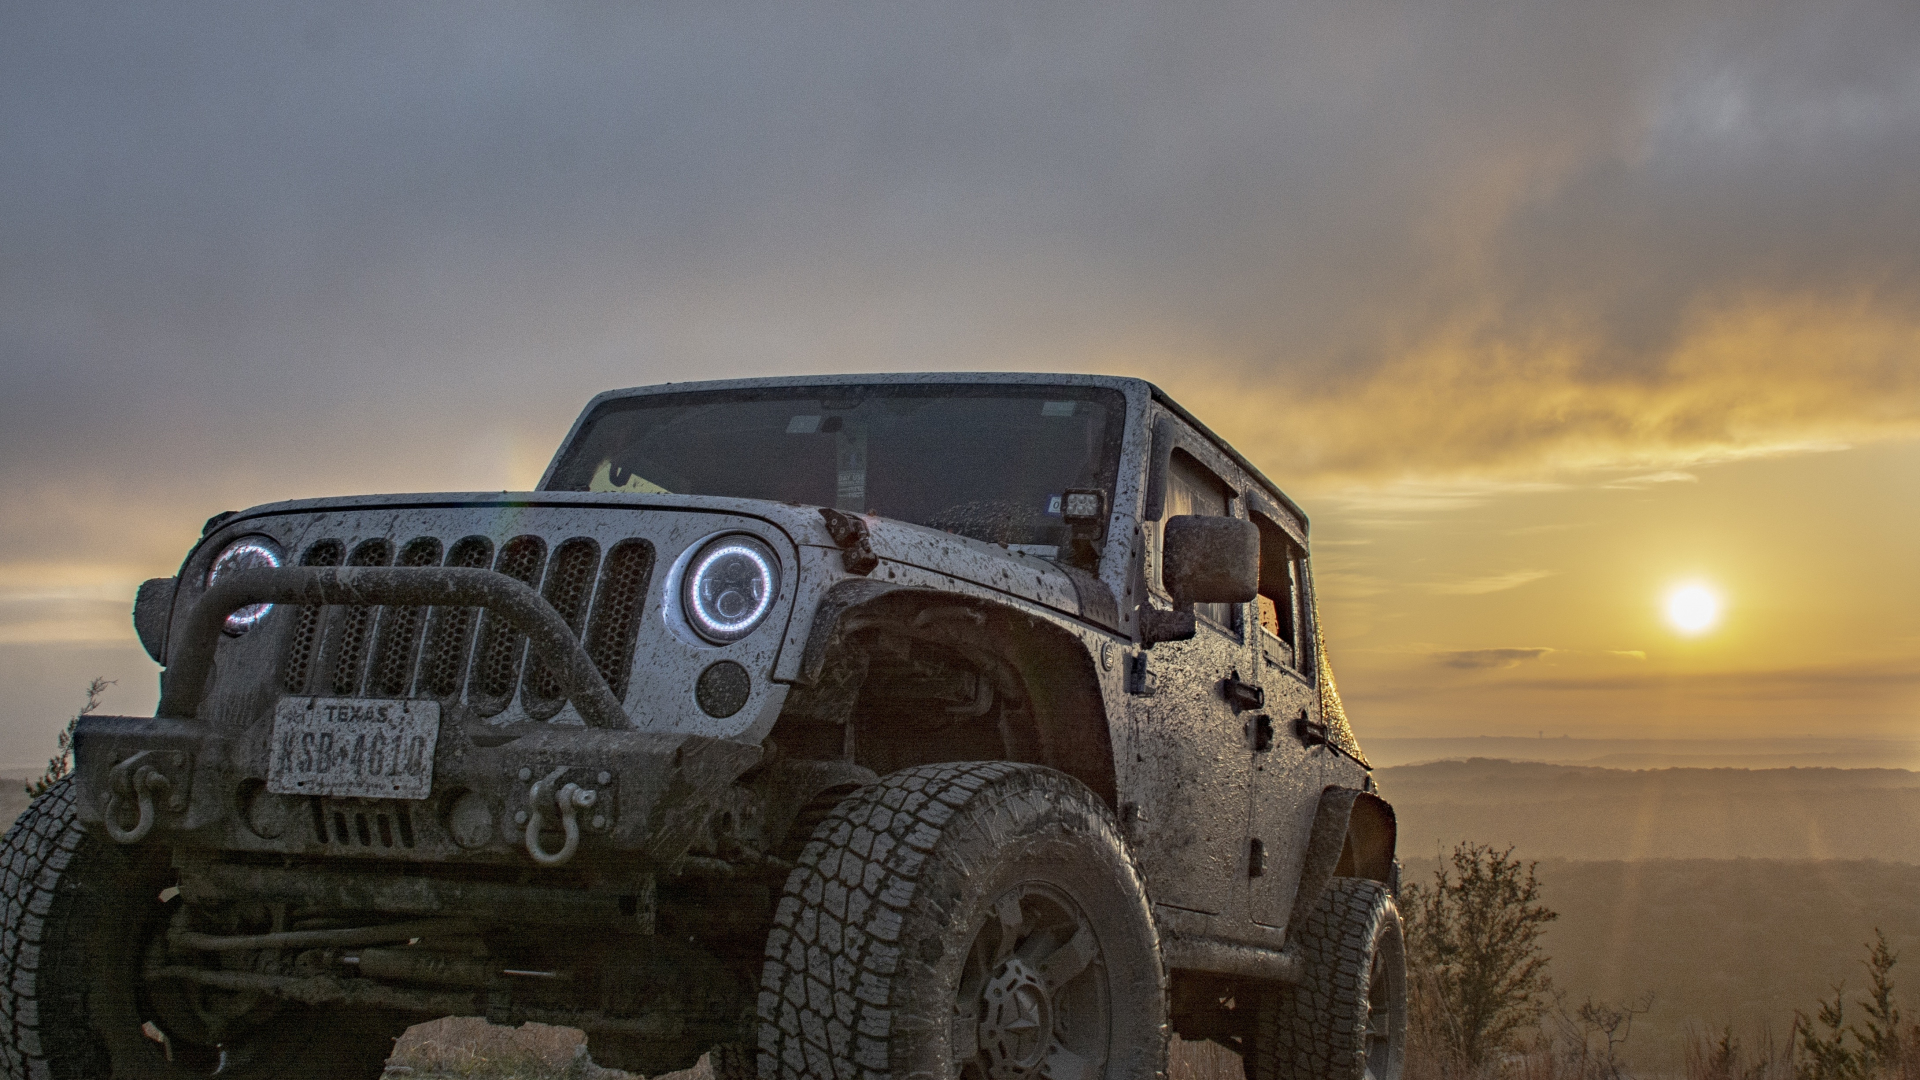 Download wallpaper 1920x1080 jeep, epic car, off-road, outdoor, full hd,  hdtv, fhd, 1080p wallpaper, 1920x1080 hd background, 19441